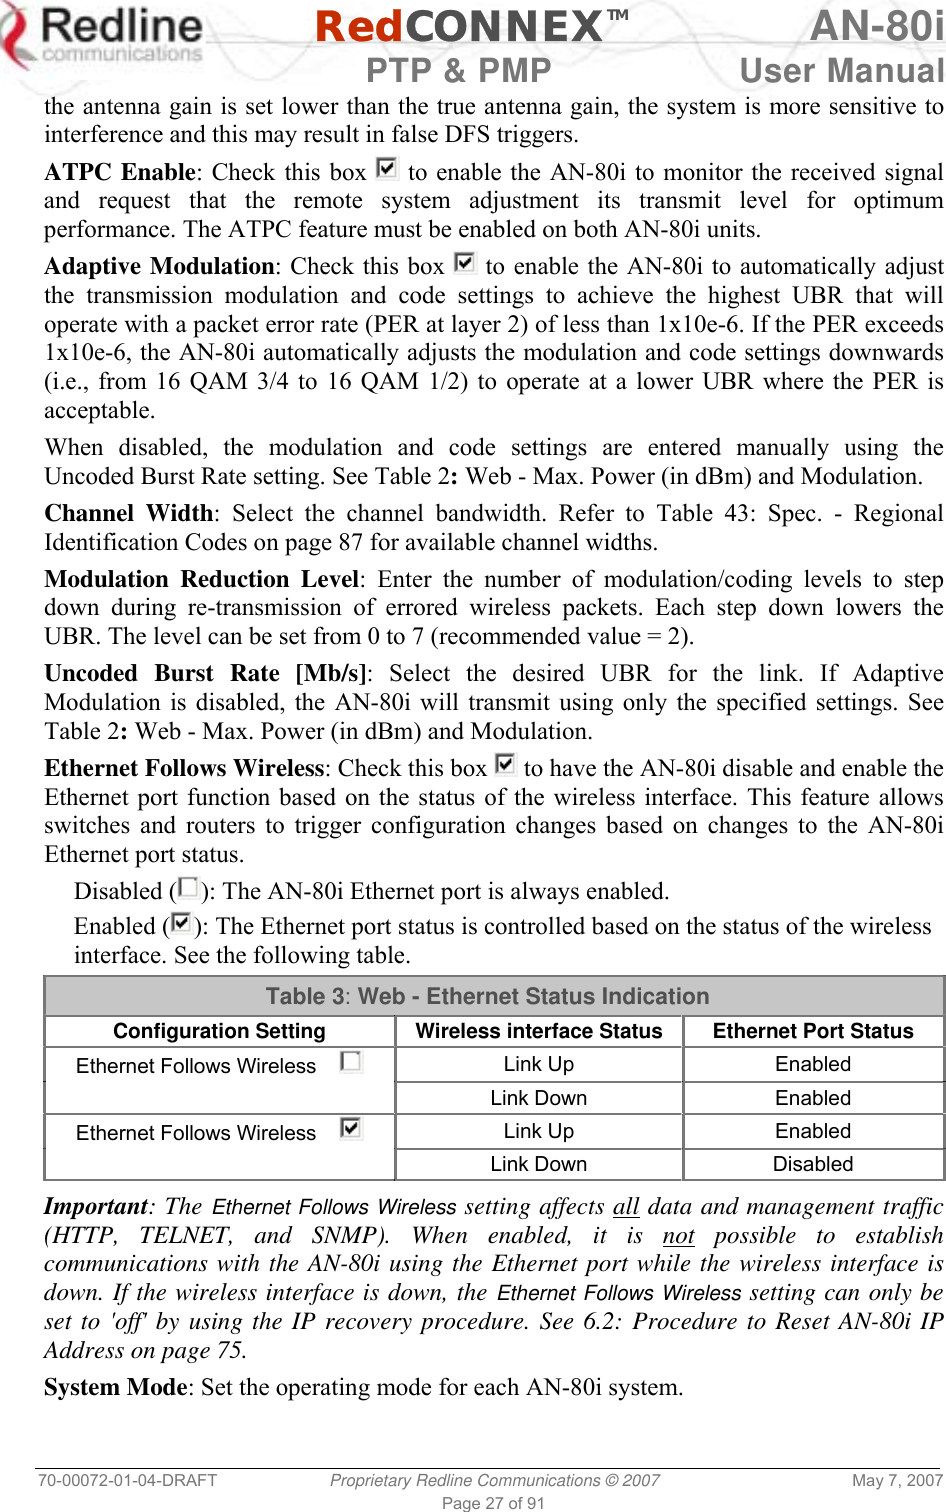   RedCONNEXTM AN-80i   PTP &amp; PMP  User Manual 70-00072-01-04-DRAFT  Proprietary Redline Communications © 2007  May 7, 2007 Page 27 of 91 the antenna gain is set lower than the true antenna gain, the system is more sensitive to interference and this may result in false DFS triggers. ATPC Enable: Check this box   to enable the AN-80i to monitor the received signal and request that the remote system adjustment its transmit level for optimum performance. The ATPC feature must be enabled on both AN-80i units. Adaptive Modulation: Check this box   to enable the AN-80i to automatically adjust the transmission modulation and code settings to achieve the highest UBR that will operate with a packet error rate (PER at layer 2) of less than 1x10e-6. If the PER exceeds 1x10e-6, the AN-80i automatically adjusts the modulation and code settings downwards (i.e., from 16 QAM 3/4 to 16 QAM 1/2) to operate at a lower UBR where the PER is acceptable. When disabled, the modulation and code settings are entered manually using the Uncoded Burst Rate setting. See Table 2: Web - Max. Power (in dBm) and Modulation. Channel Width: Select the channel bandwidth. Refer to Table 43: Spec. - Regional Identification Codes on page 87 for available channel widths. Modulation Reduction Level: Enter the number of modulation/coding levels to step down during re-transmission of errored wireless packets. Each step down lowers the UBR. The level can be set from 0 to 7 (recommended value = 2). Uncoded Burst Rate [Mb/s]: Select the desired UBR for the link. If Adaptive Modulation is disabled, the AN-80i will transmit using only the specified settings. See Table 2: Web - Max. Power (in dBm) and Modulation.  Ethernet Follows Wireless: Check this box   to have the AN-80i disable and enable the Ethernet port function based on the status of the wireless interface. This feature allows switches and routers to trigger configuration changes based on changes to the AN-80i Ethernet port status. Disabled ( ): The AN-80i Ethernet port is always enabled. Enabled ( ): The Ethernet port status is controlled based on the status of the wireless interface. See the following table. Table 3: Web - Ethernet Status Indication Configuration Setting  Wireless interface Status  Ethernet Port Status Ethernet Follows Wireless      Link Up  Enabled  Link Down Enabled Ethernet Follows Wireless      Link Up  Enabled  Link Down Disabled  Important: The Ethernet Follows Wireless setting affects all data and management traffic (HTTP, TELNET, and SNMP). When enabled, it is not possible to establish communications with the AN-80i using the Ethernet port while the wireless interface is down. If the wireless interface is down, the Ethernet Follows Wireless setting can only be set to &apos;off&apos; by using the IP recovery procedure. See 6.2: Procedure to Reset AN-80i IP Address on page 75. System Mode: Set the operating mode for each AN-80i system. 